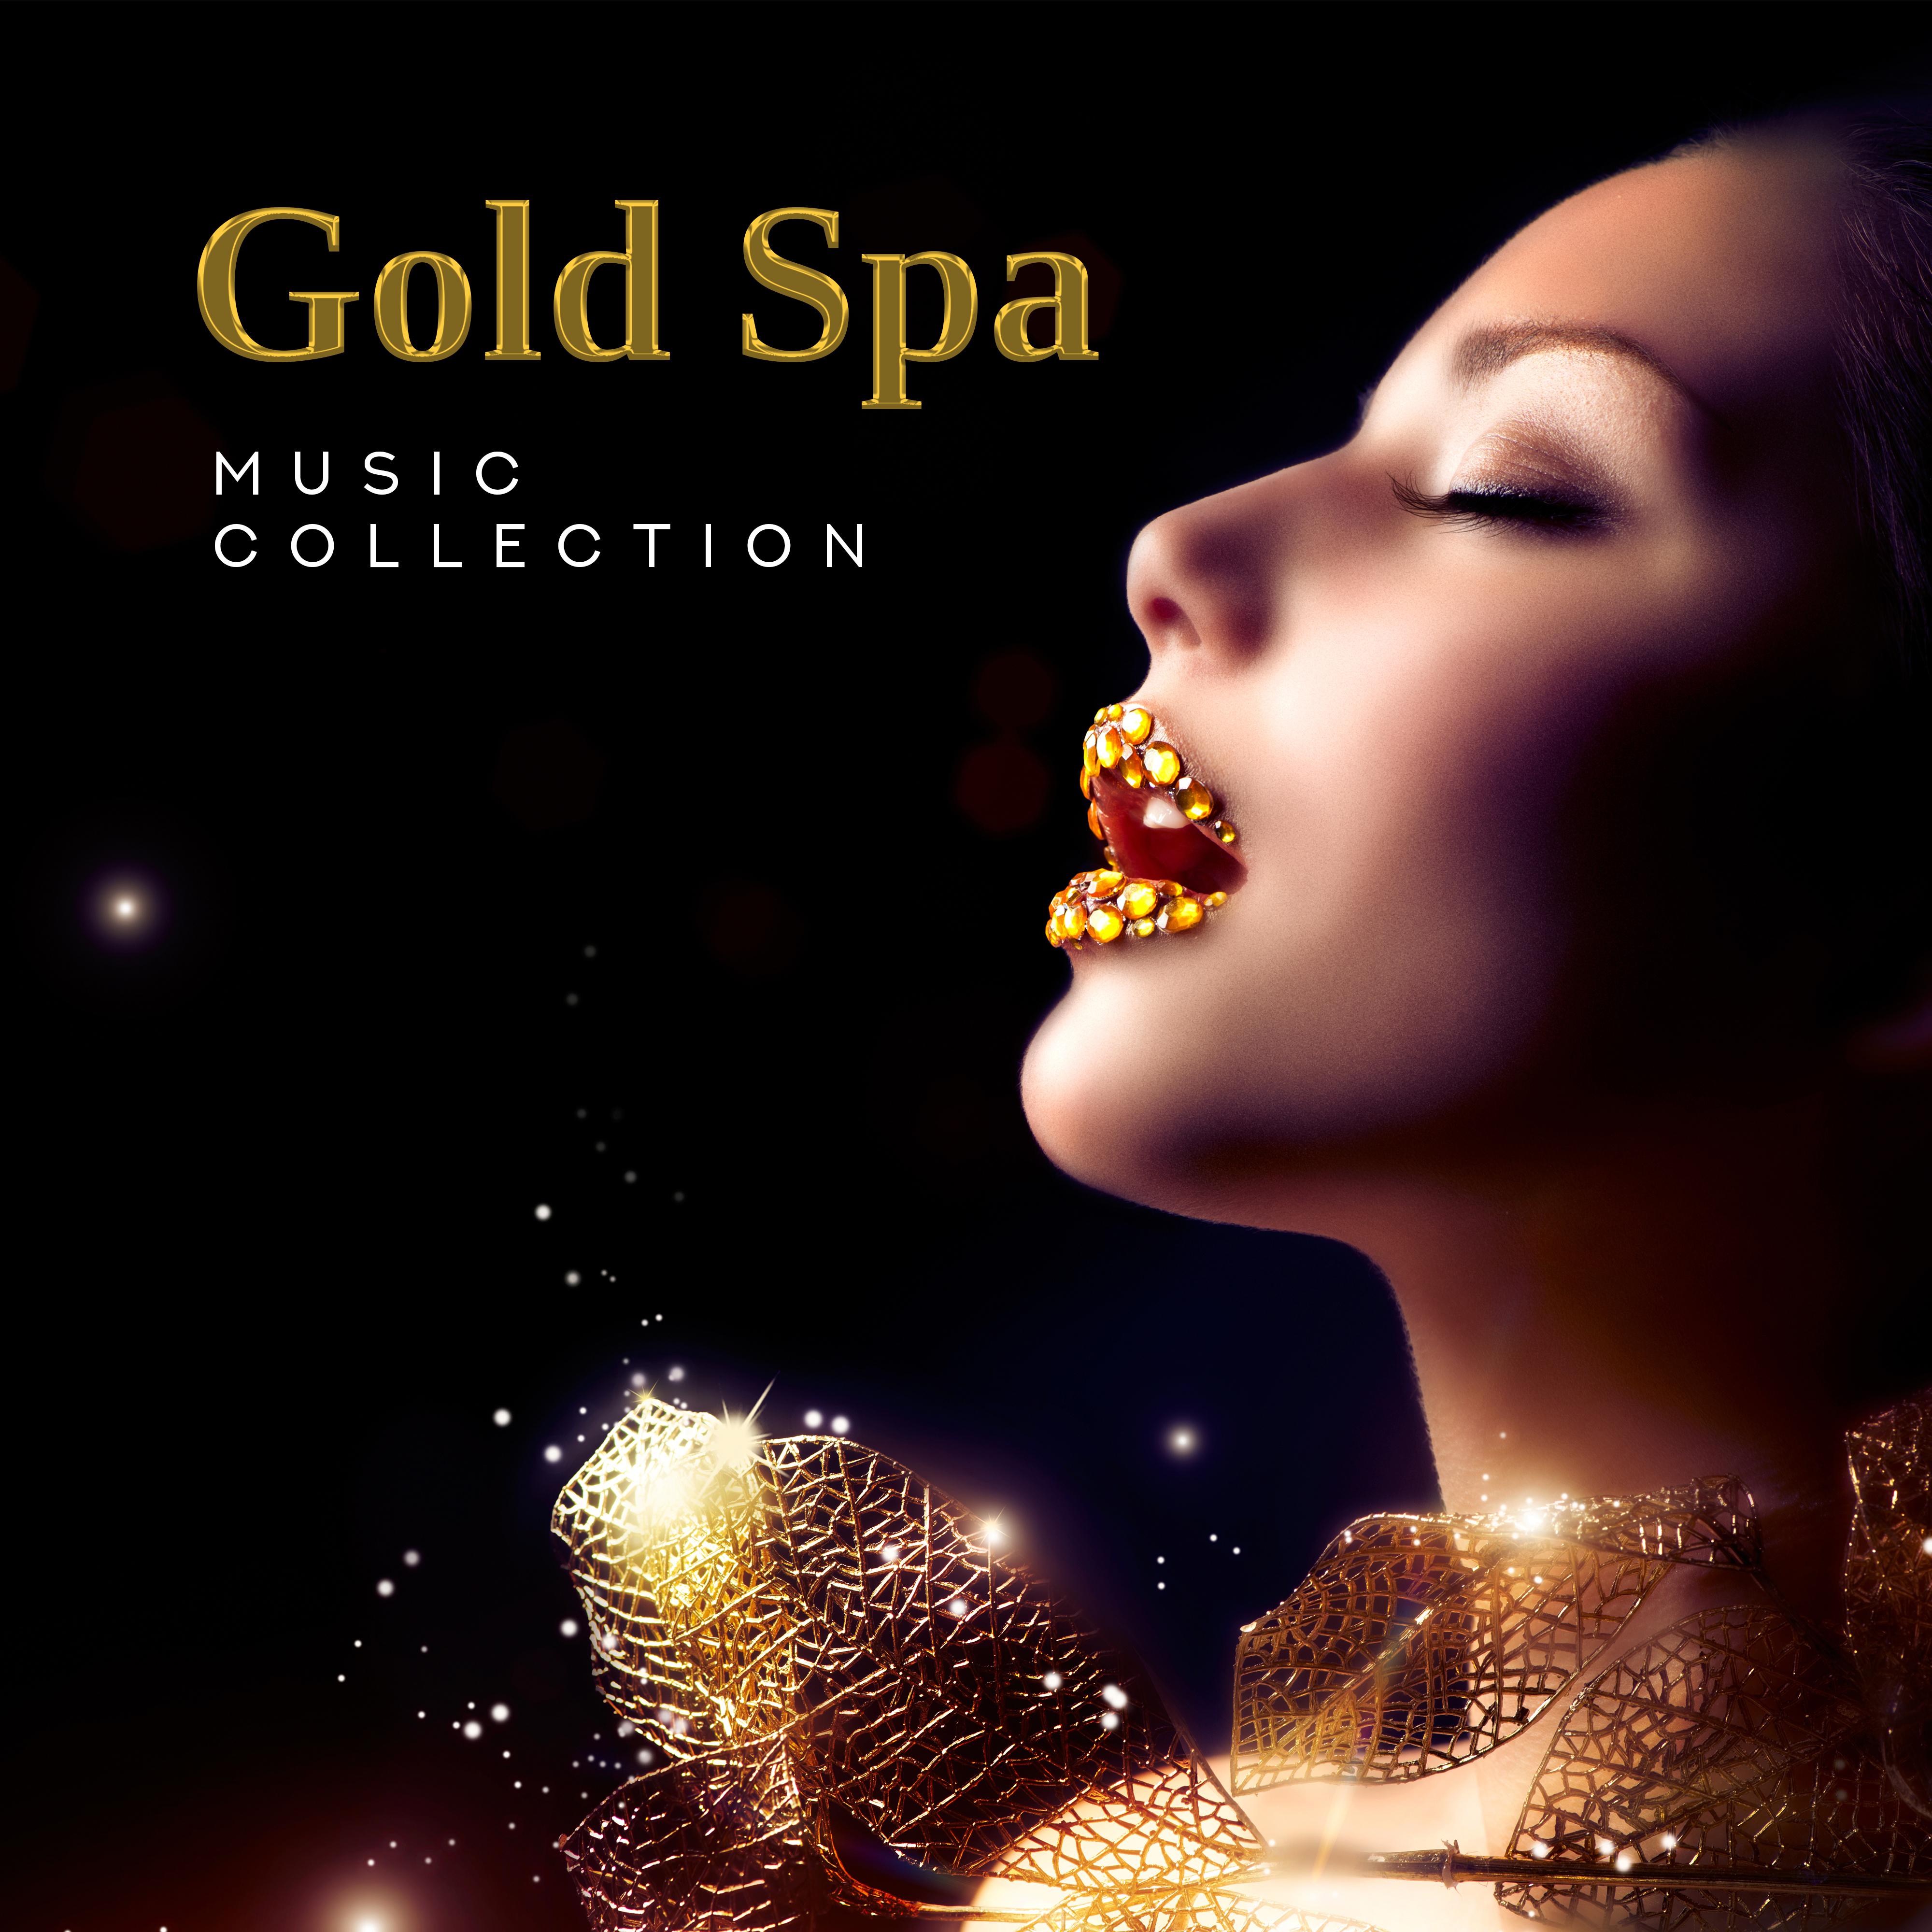 Gold Spa Music Collection - 15 of the Greatest Songs for the Spa, Massage, Wellness and Relaxation